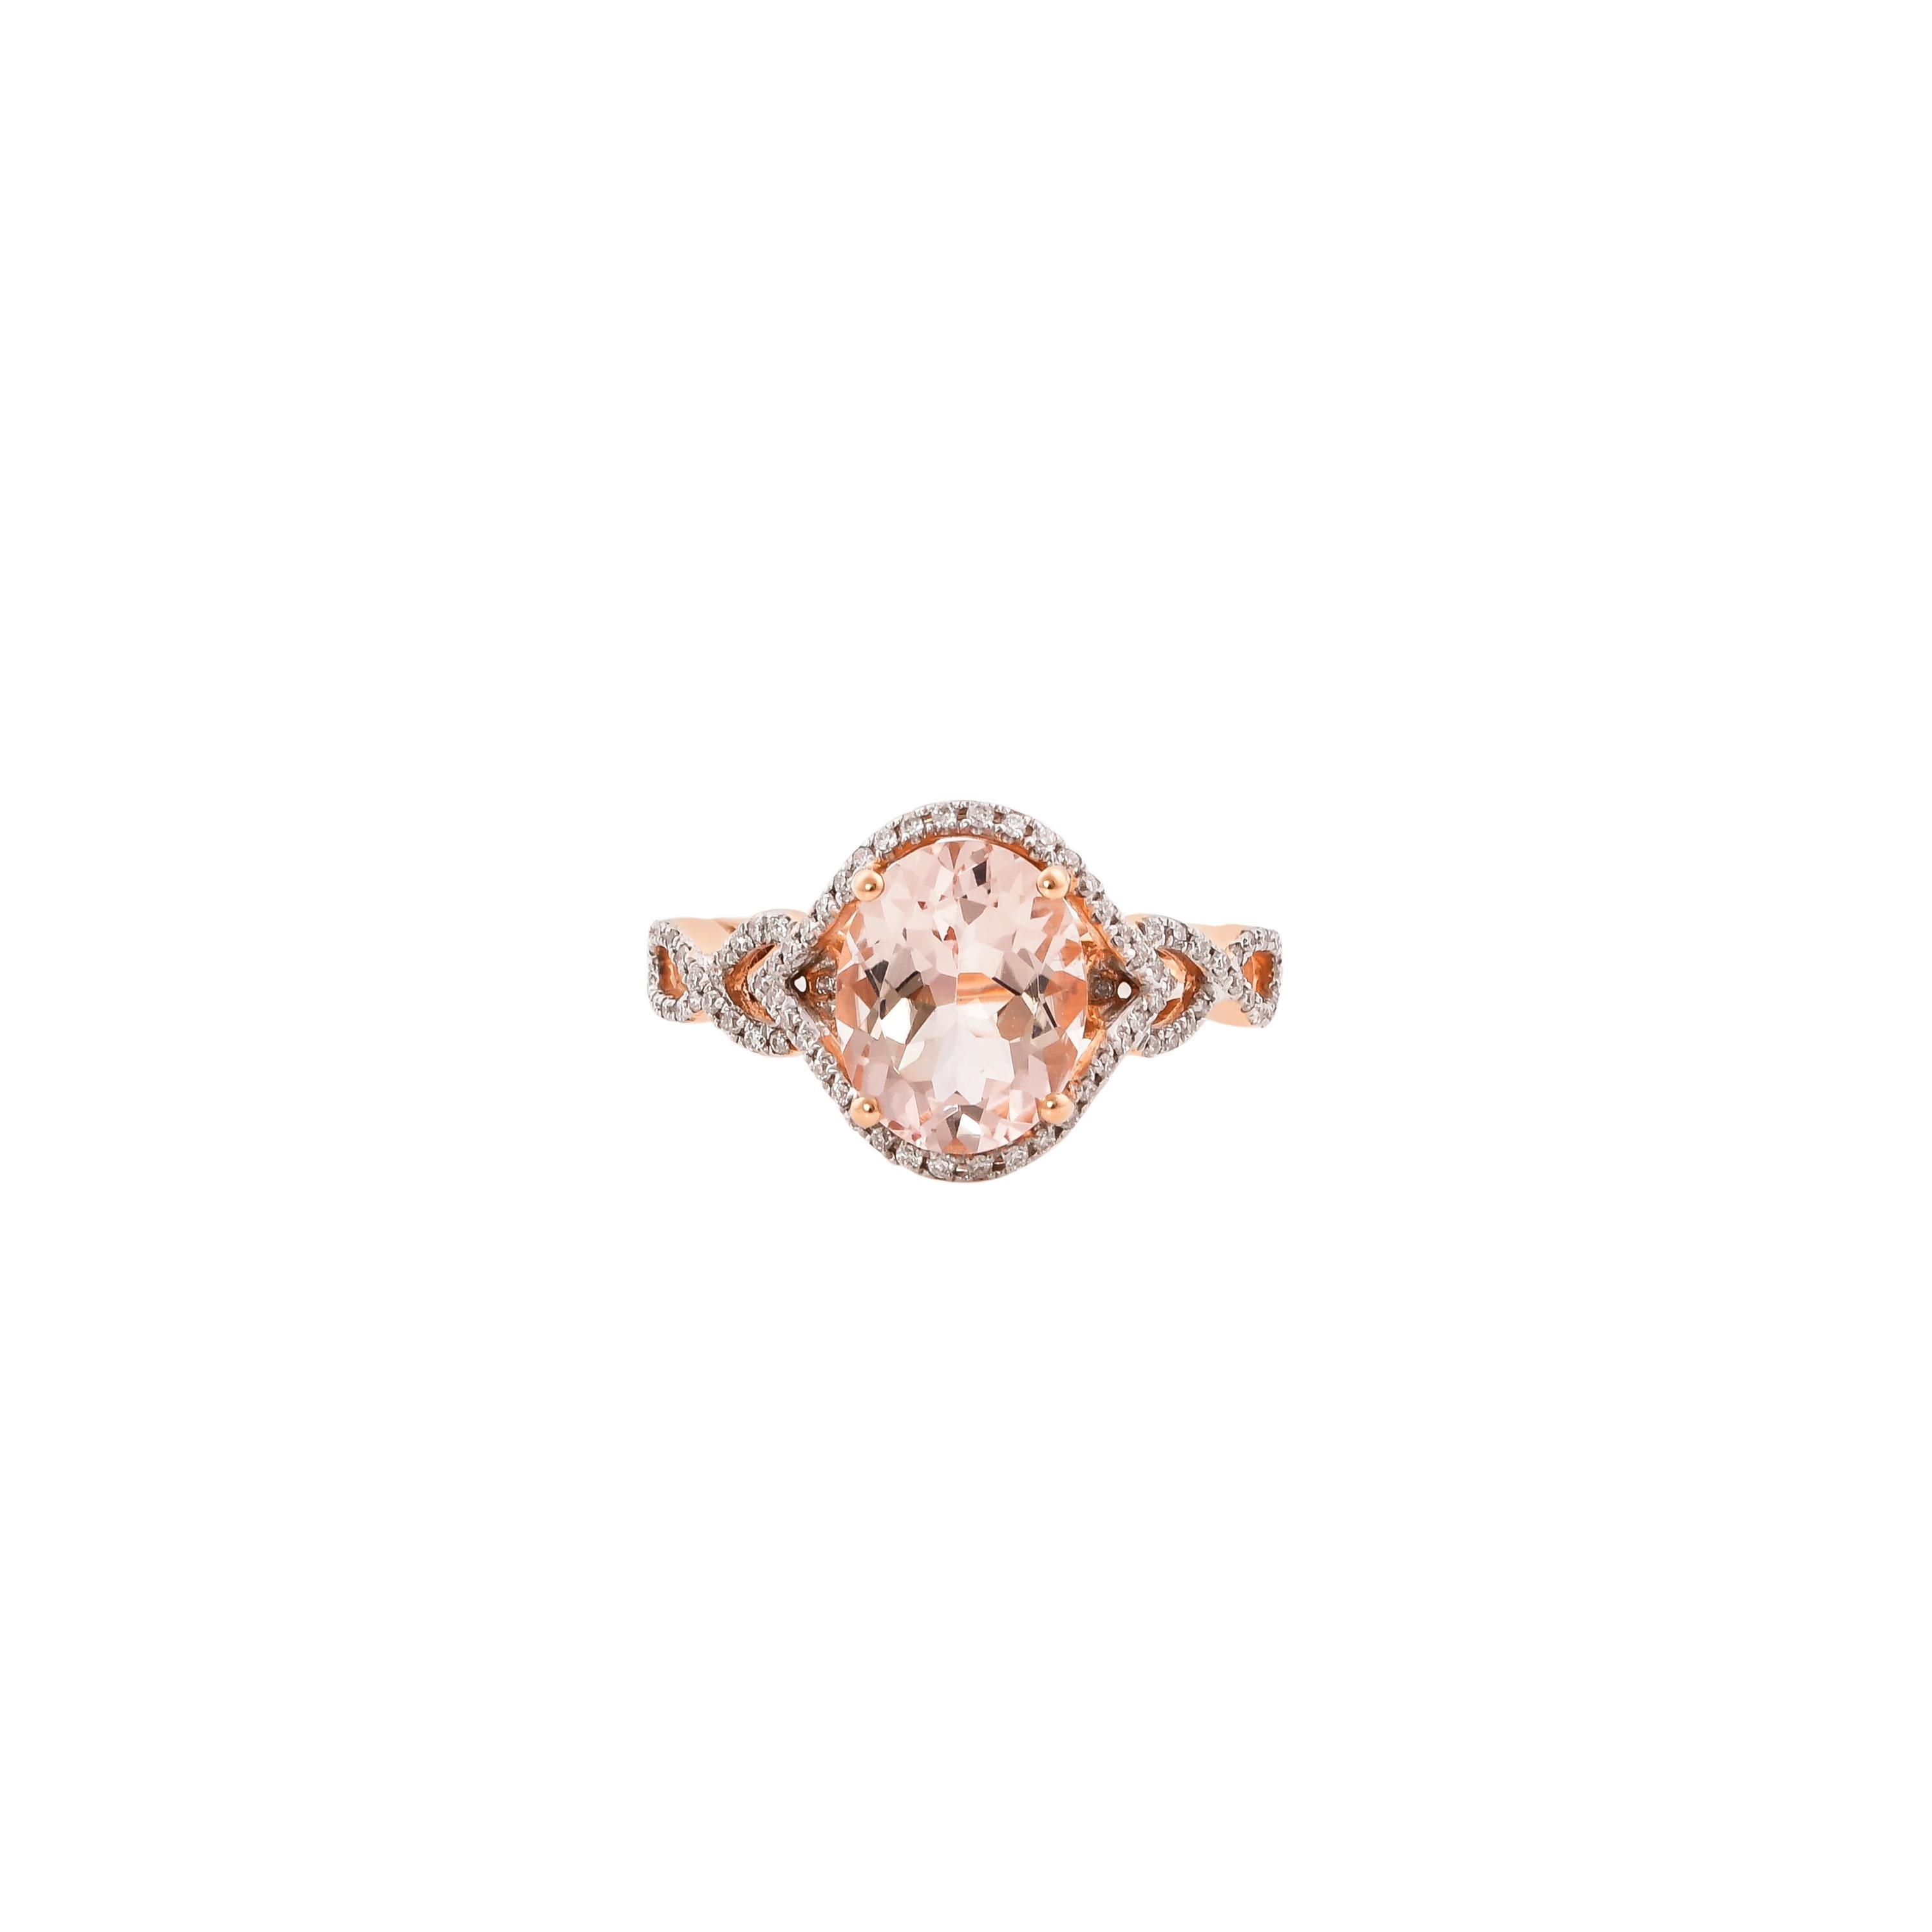 Contemporary 2.26 Carat Morganite and Diamond Ring in 18 Karat Rose Gold For Sale